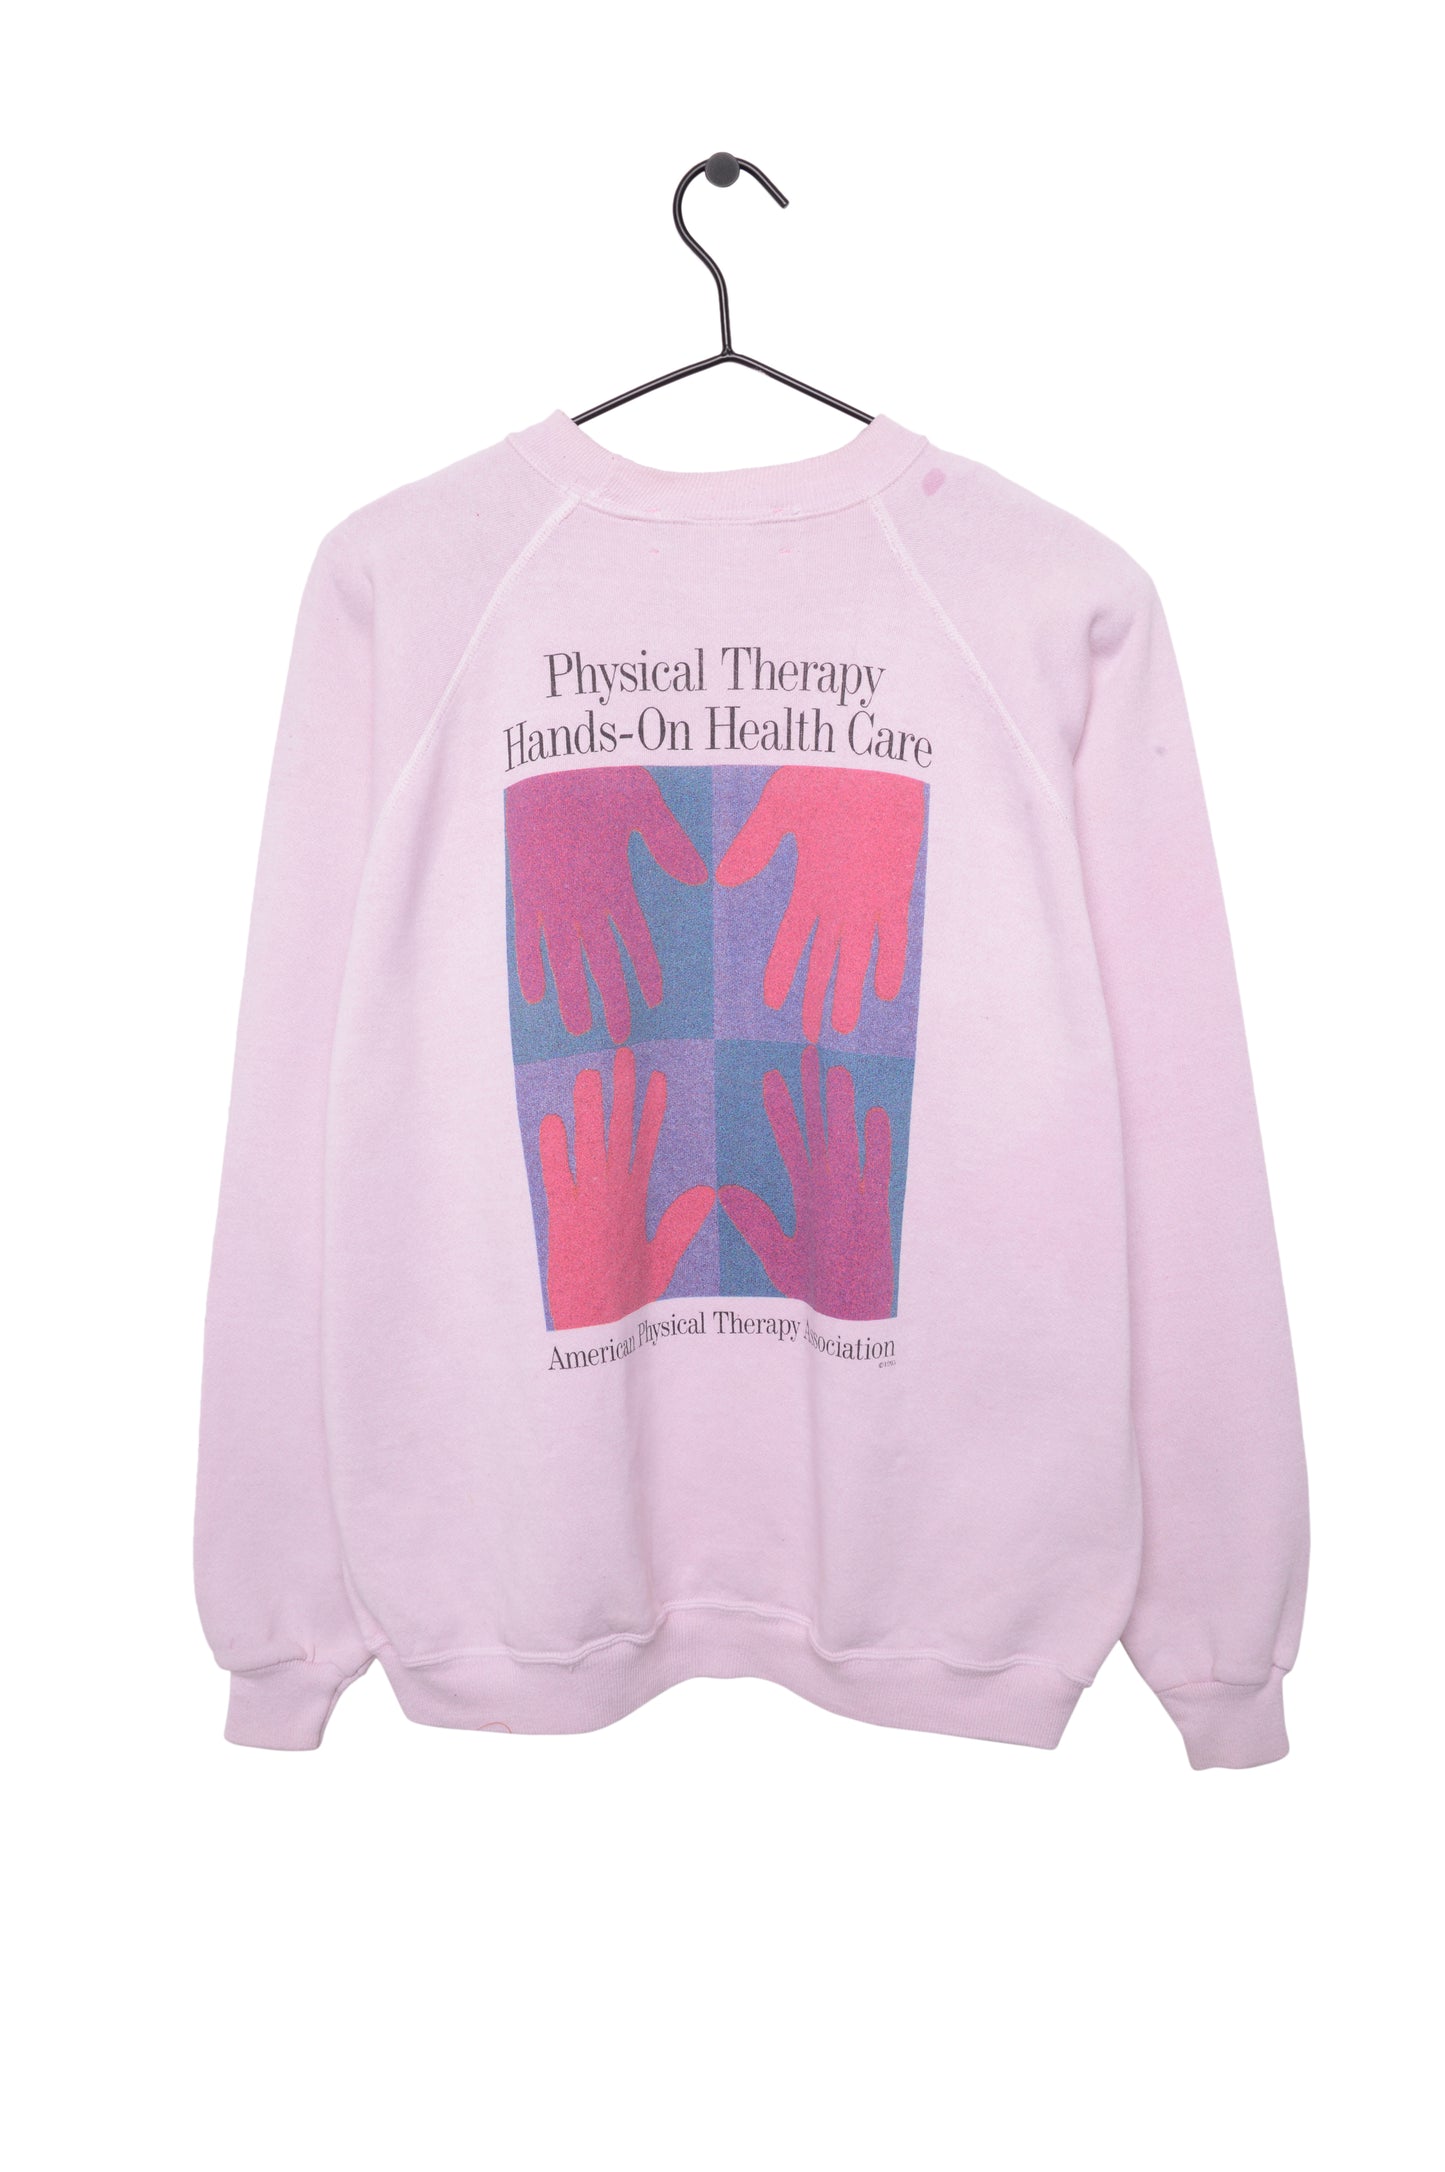 Hands On Physical Therapy Sweatshirt